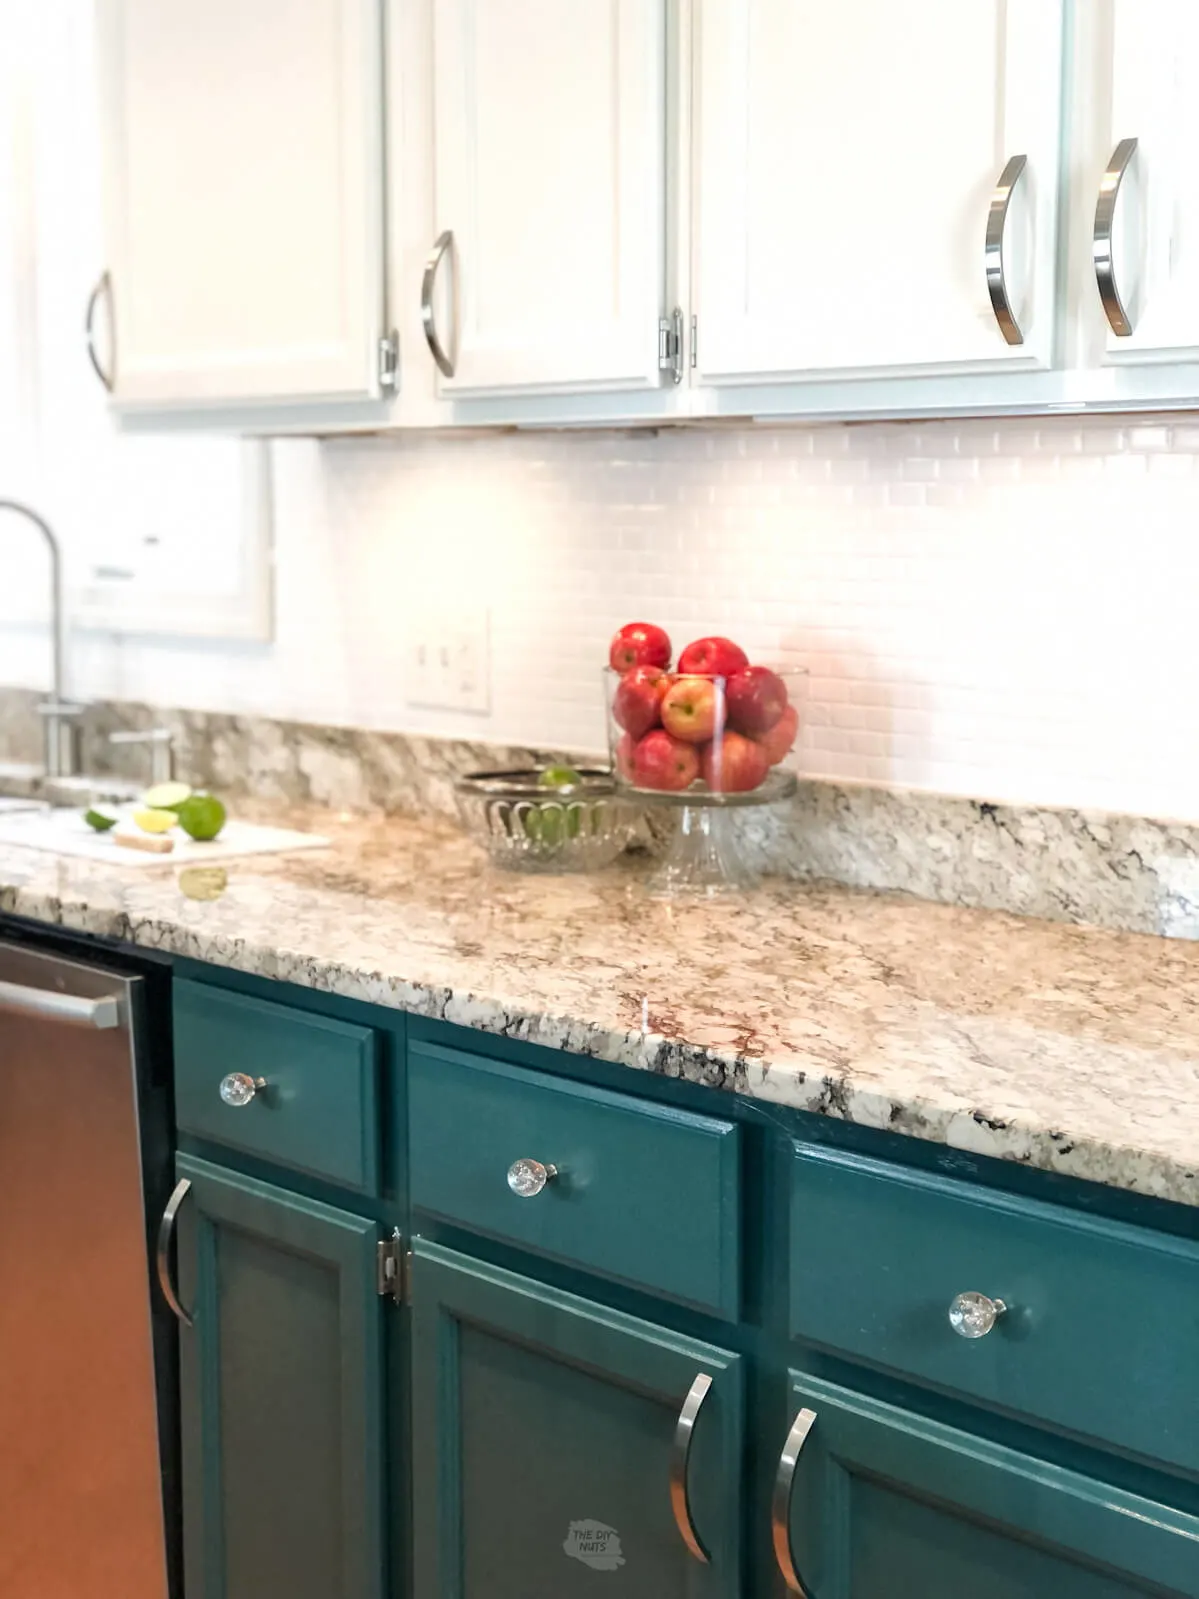 two toned painted blue green kitchen cabinets with white upper cabinets and red apples on counter.